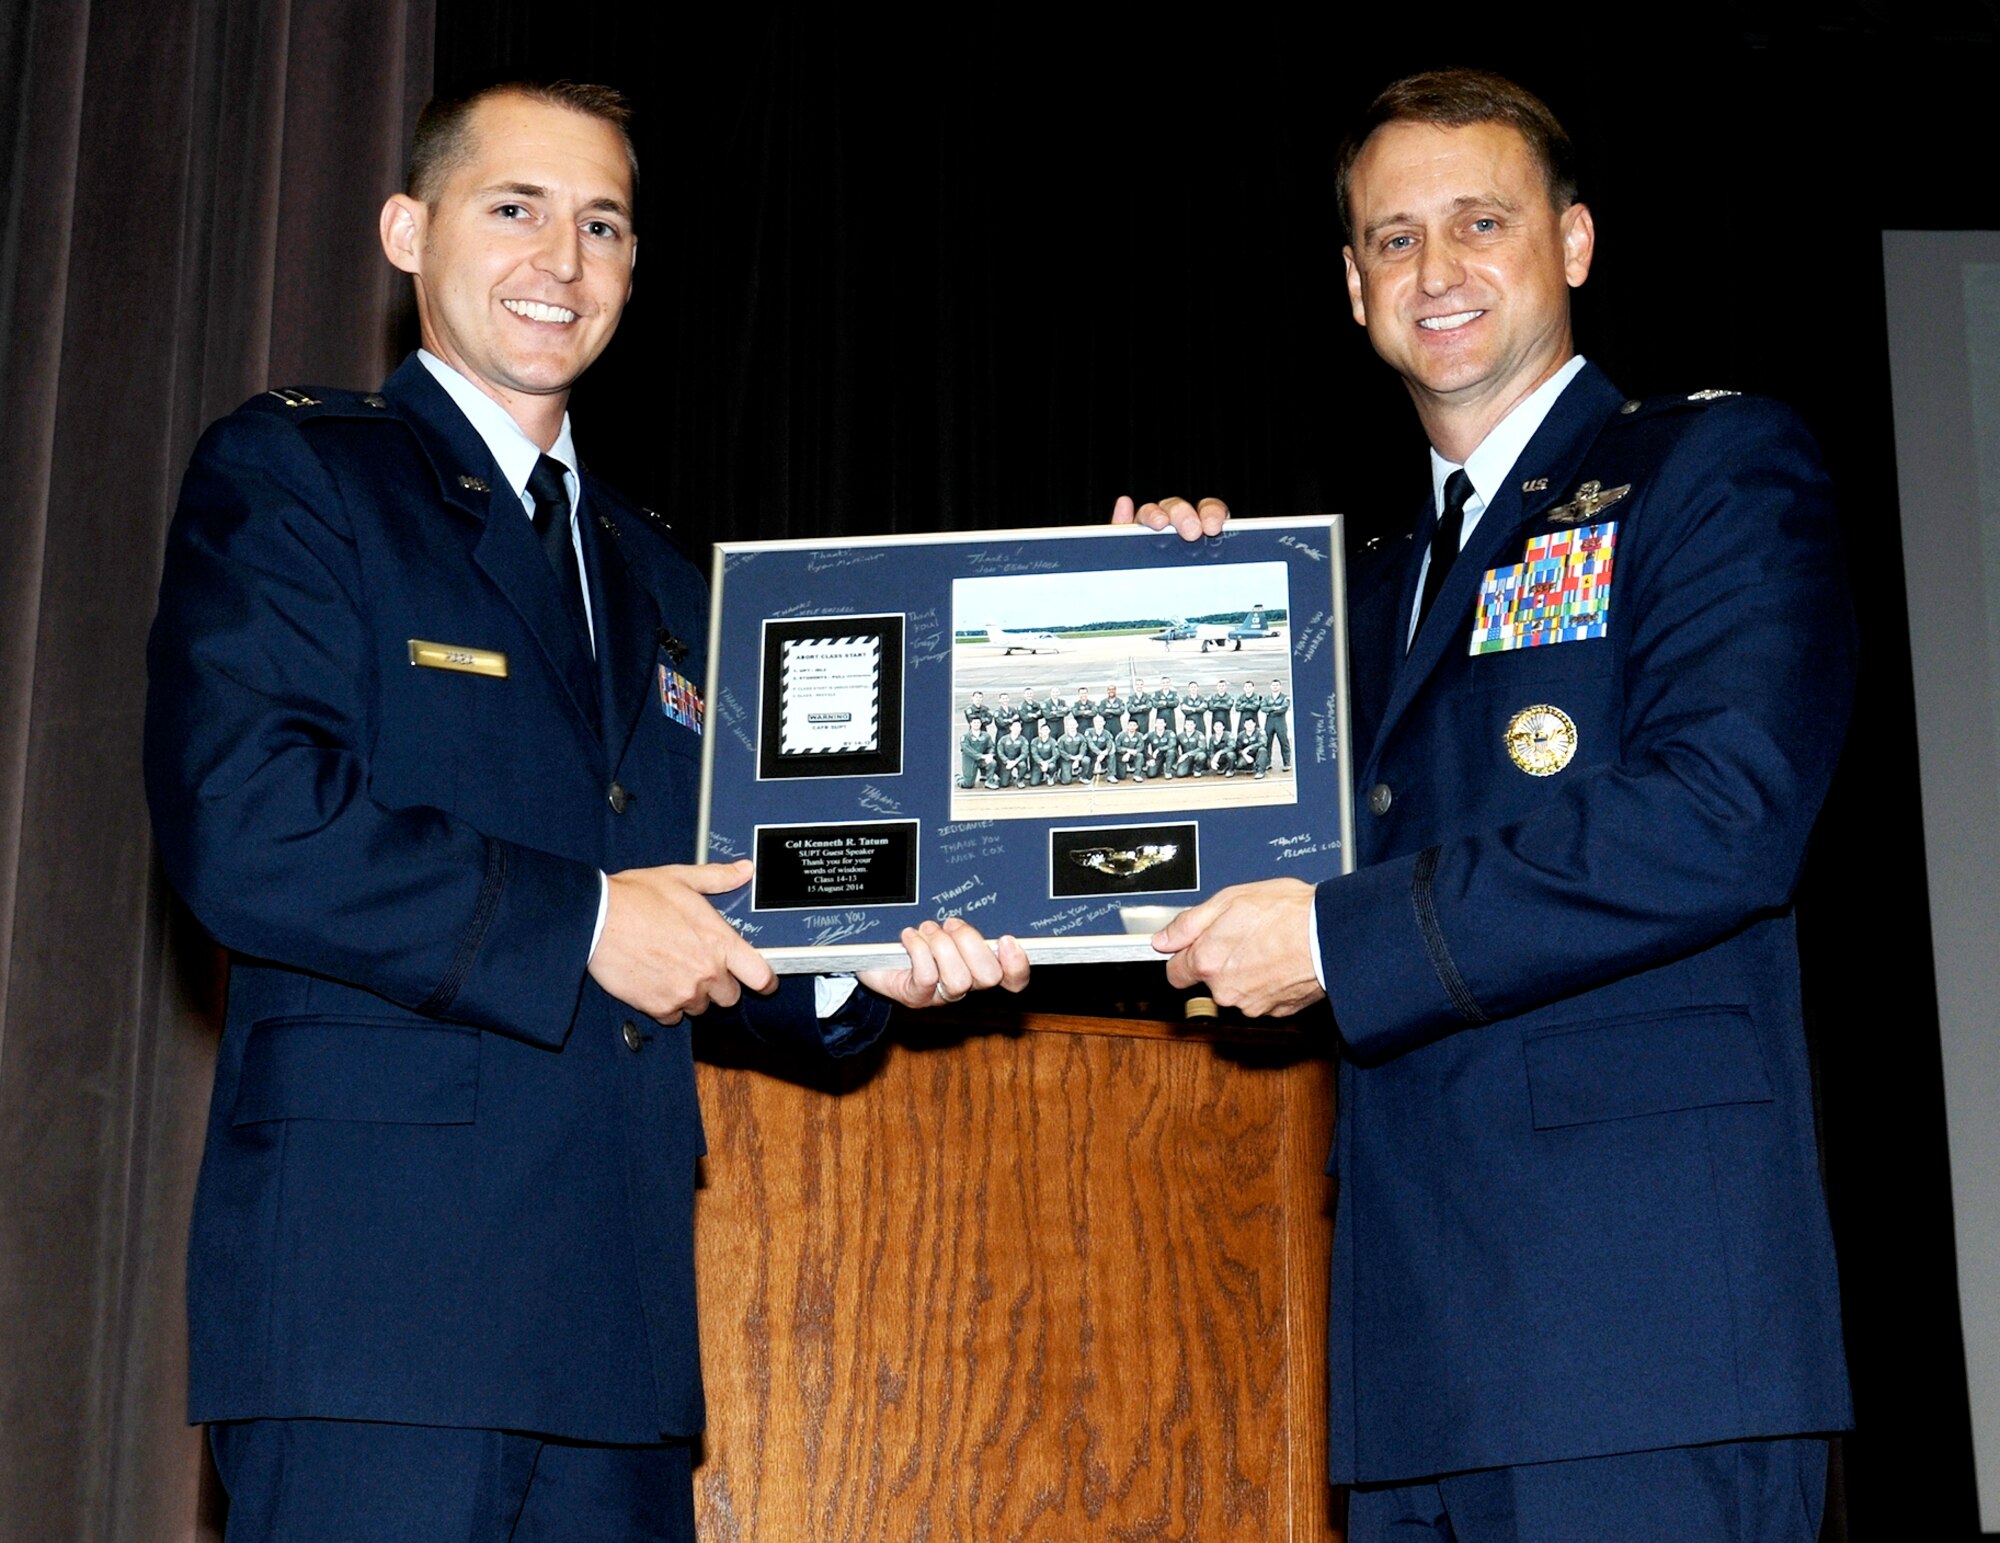 Capt. Jonathon Haba, Specialized Undergraduate Pilot Training class 14-13 senior ranking officer, hands a lithograph to Col. Kenneth Tatum, Commander of the Ira C. Eaker Center for Professional Development at Air University, Maxwell-Gunter Air Force Base, as a gift for being the guest speaker for the graduation. (U.S. Air Force photo/ Melissa Doublin)  